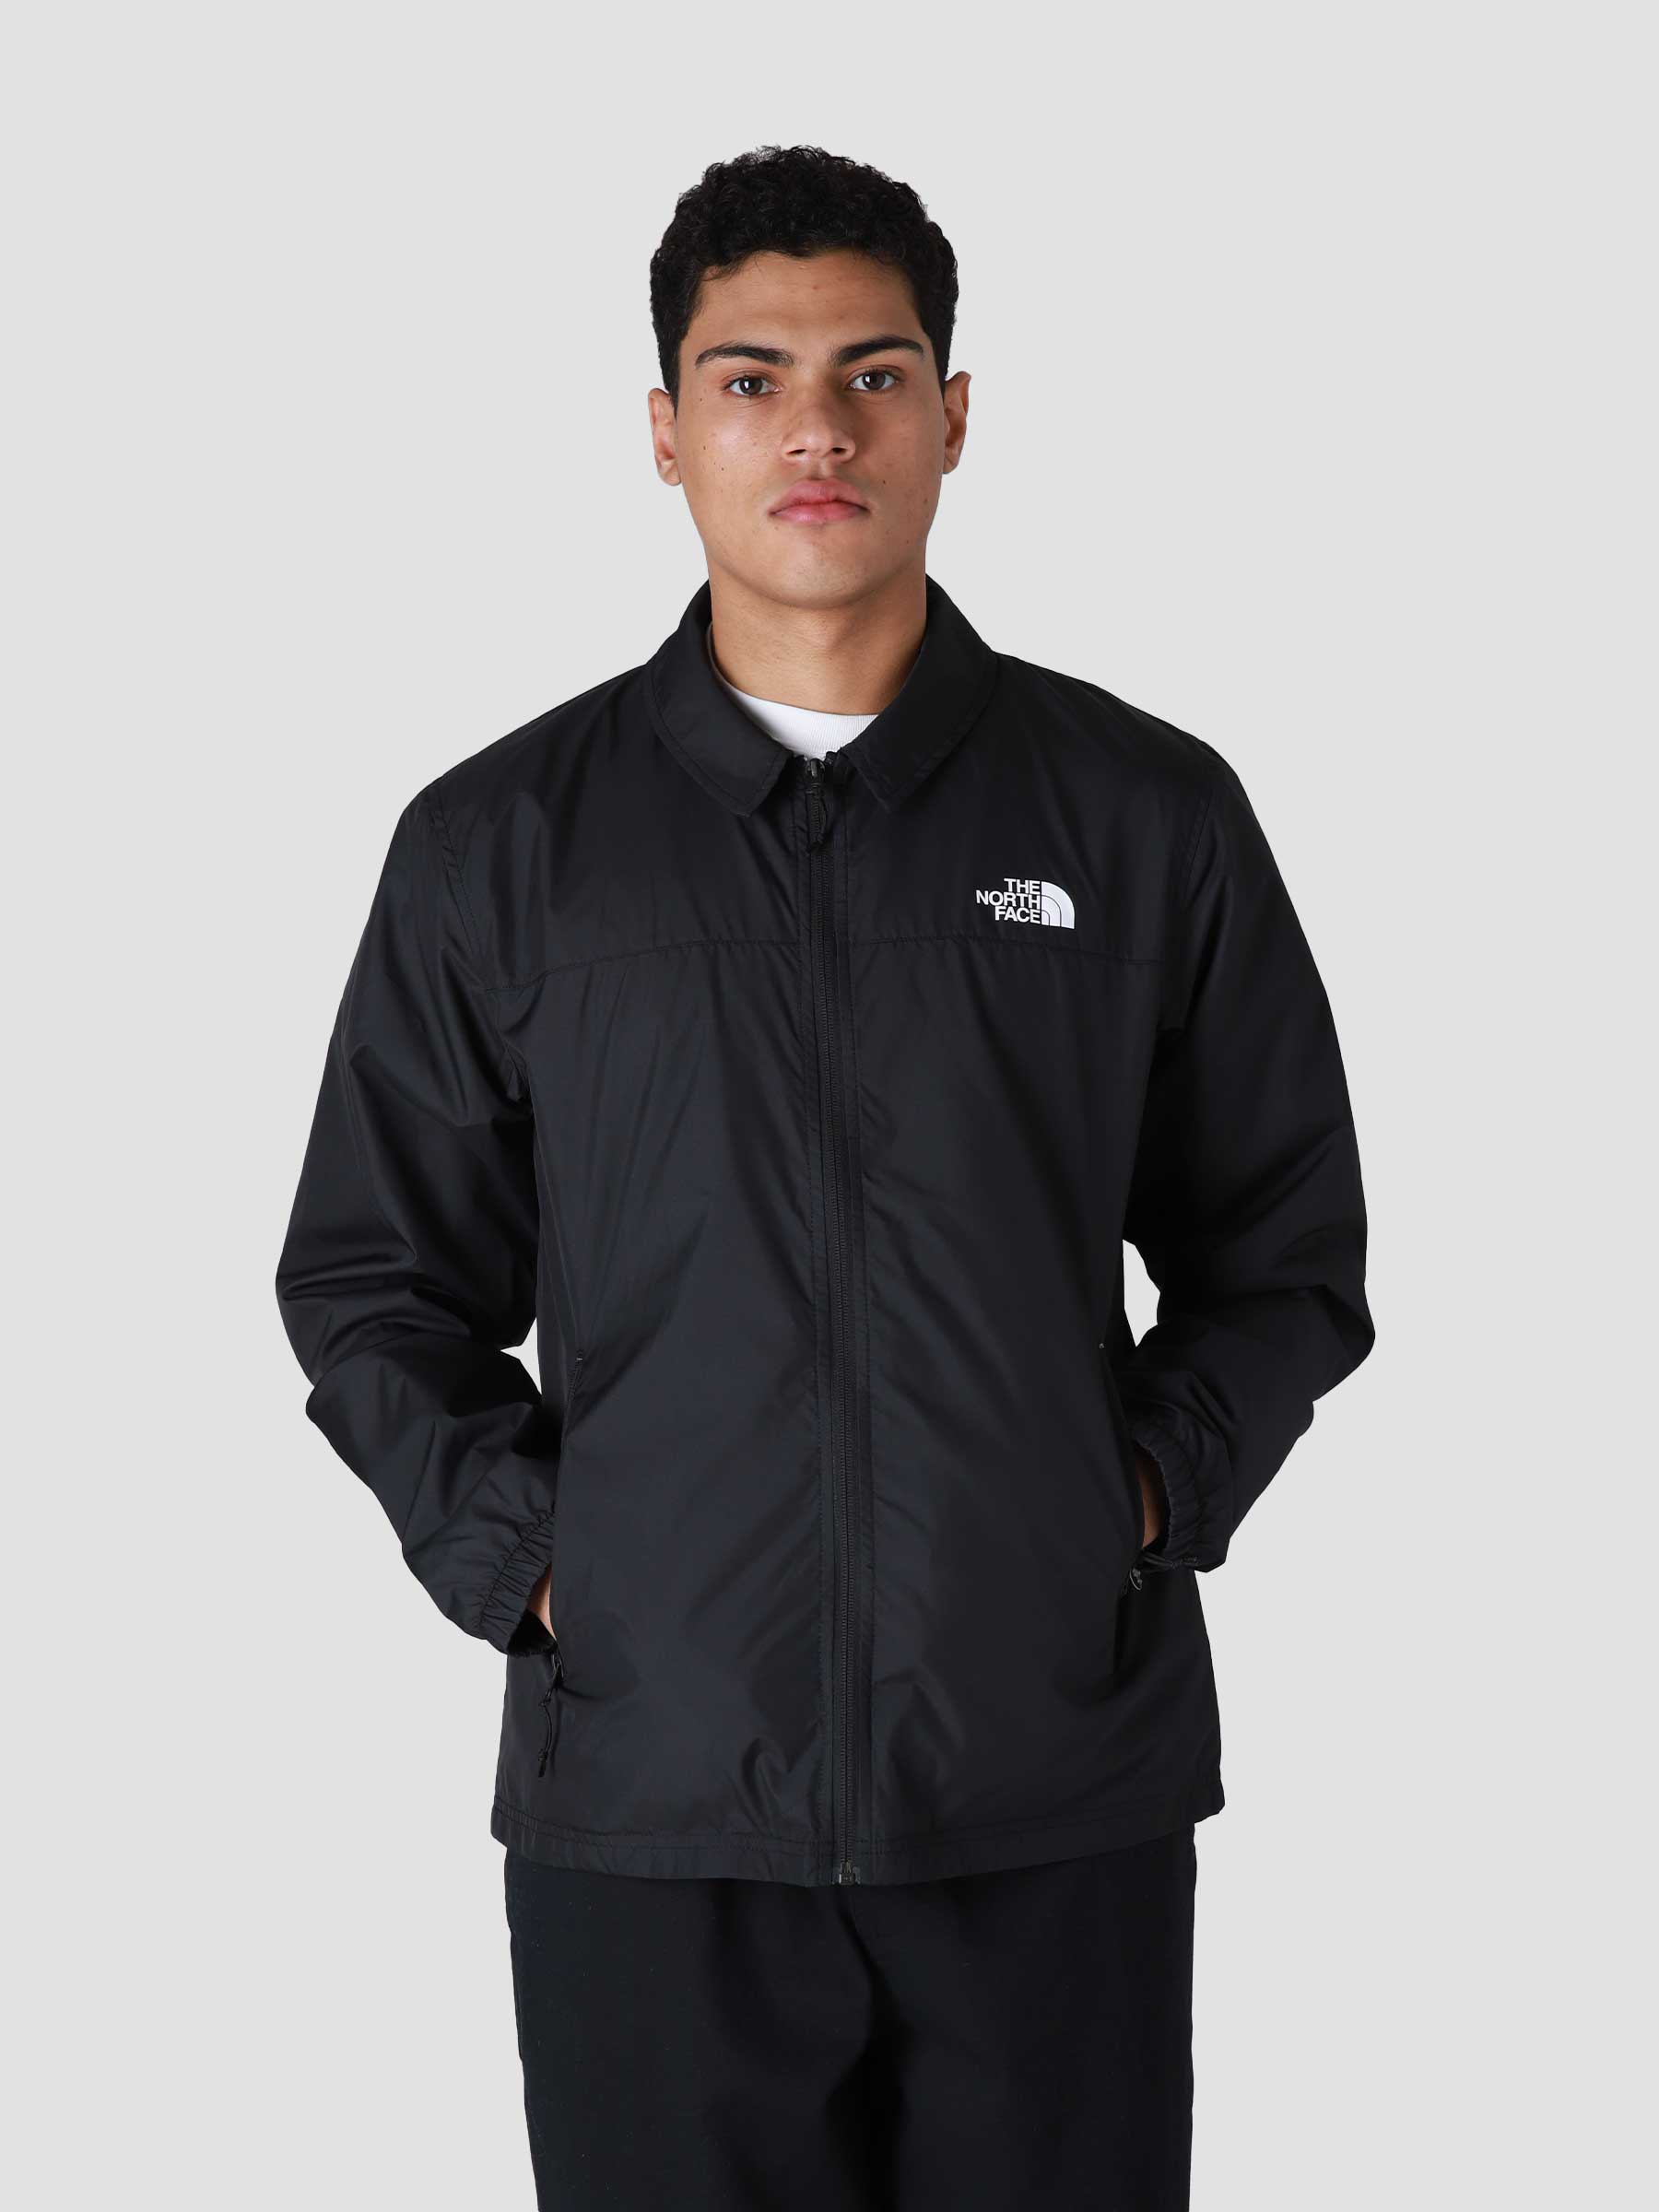 Sneakerjagers Outfit Picks The North Face Coach Jacket